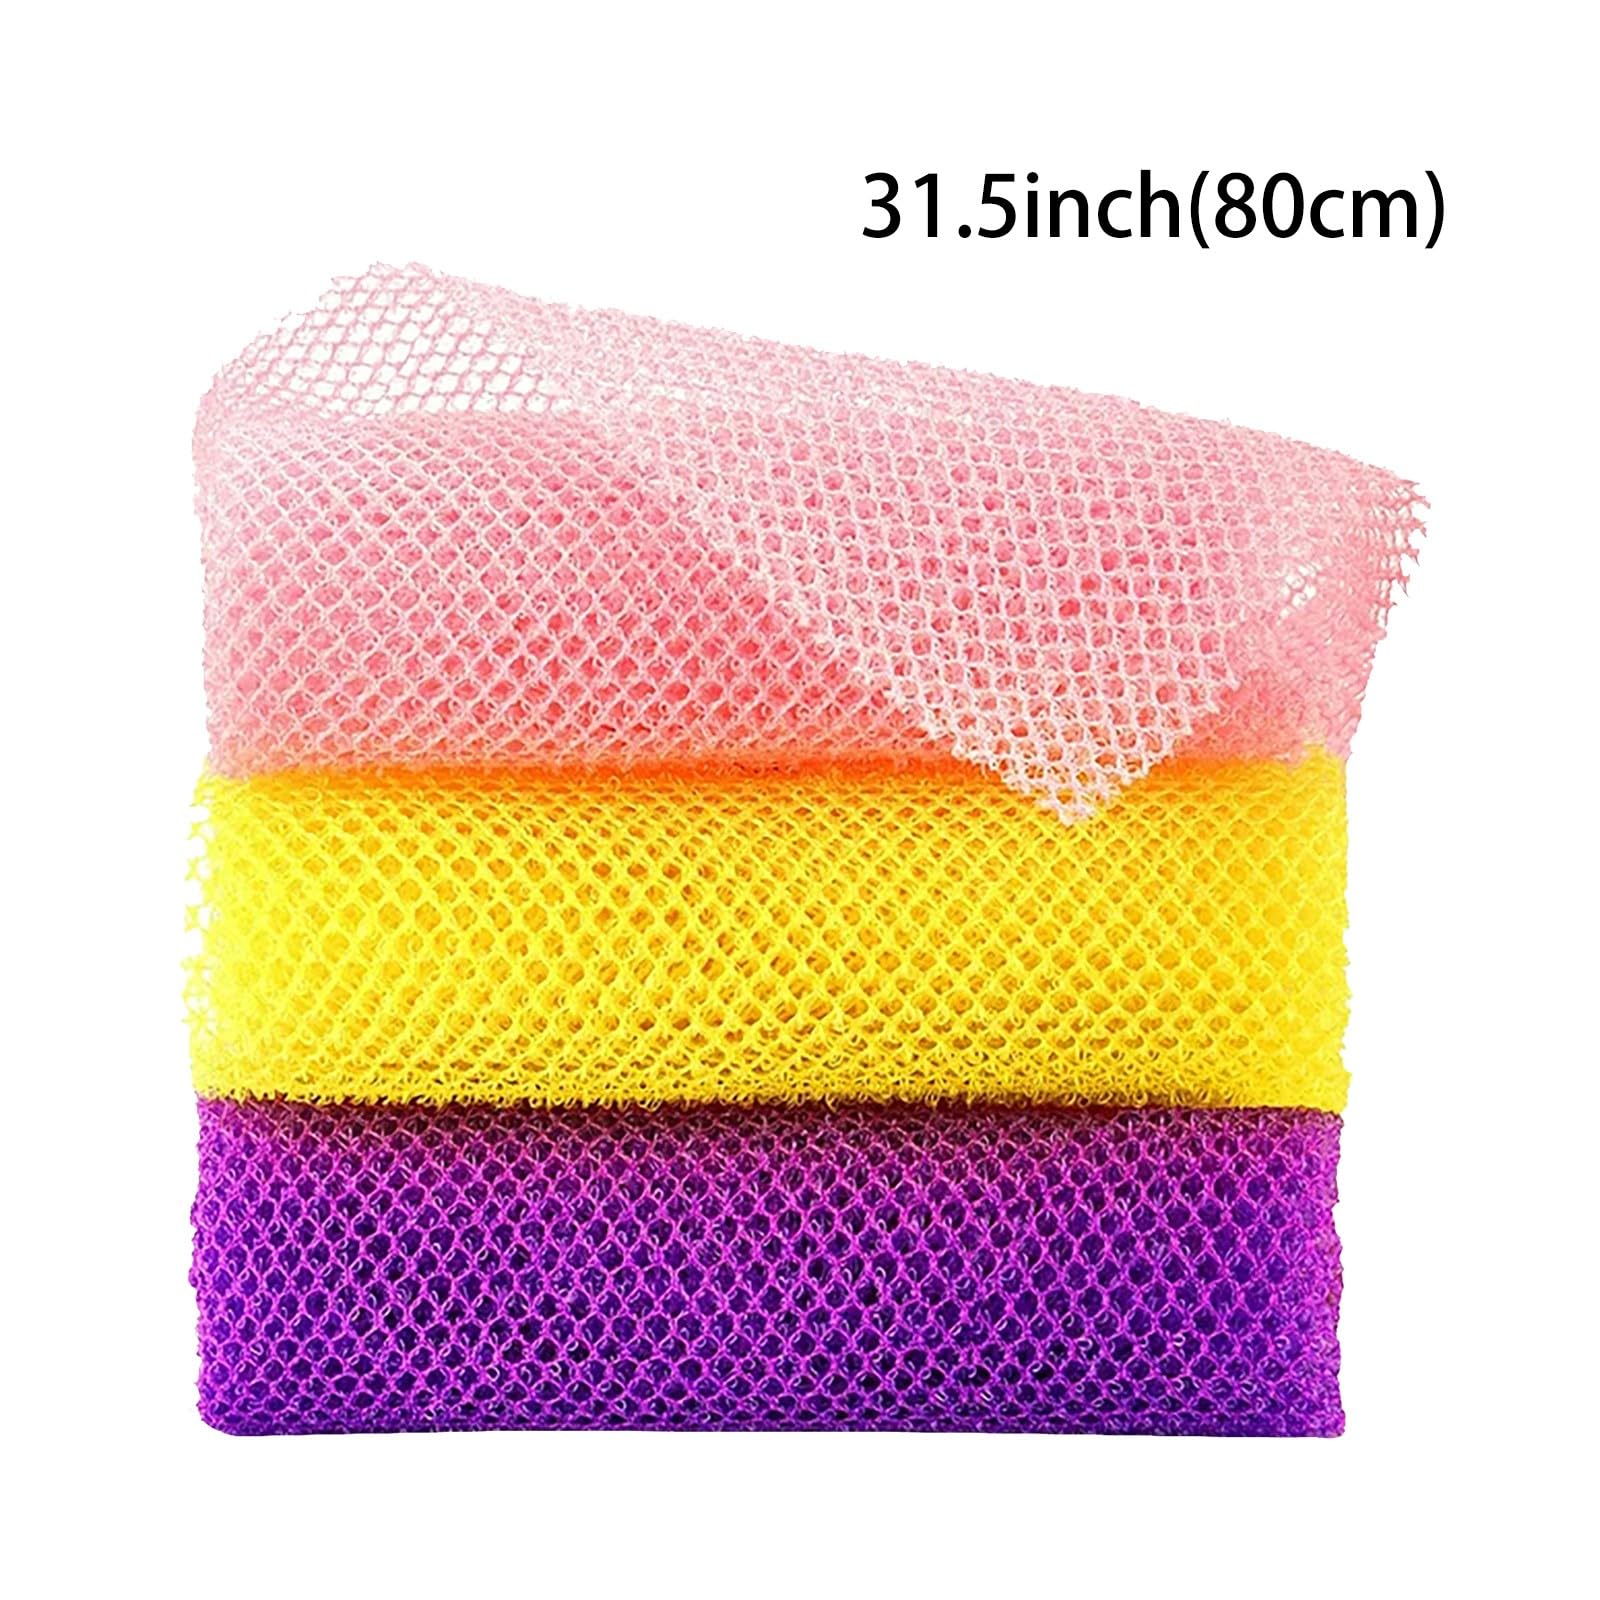 3 Pieces African Bath Sponge African Net Long Net Bath Sponge Exfoliating Shower Body Scrubber Back Scrubber Skin Smoother Great for Daily Use Sponge Stick Clamp (Yellow, One Size)